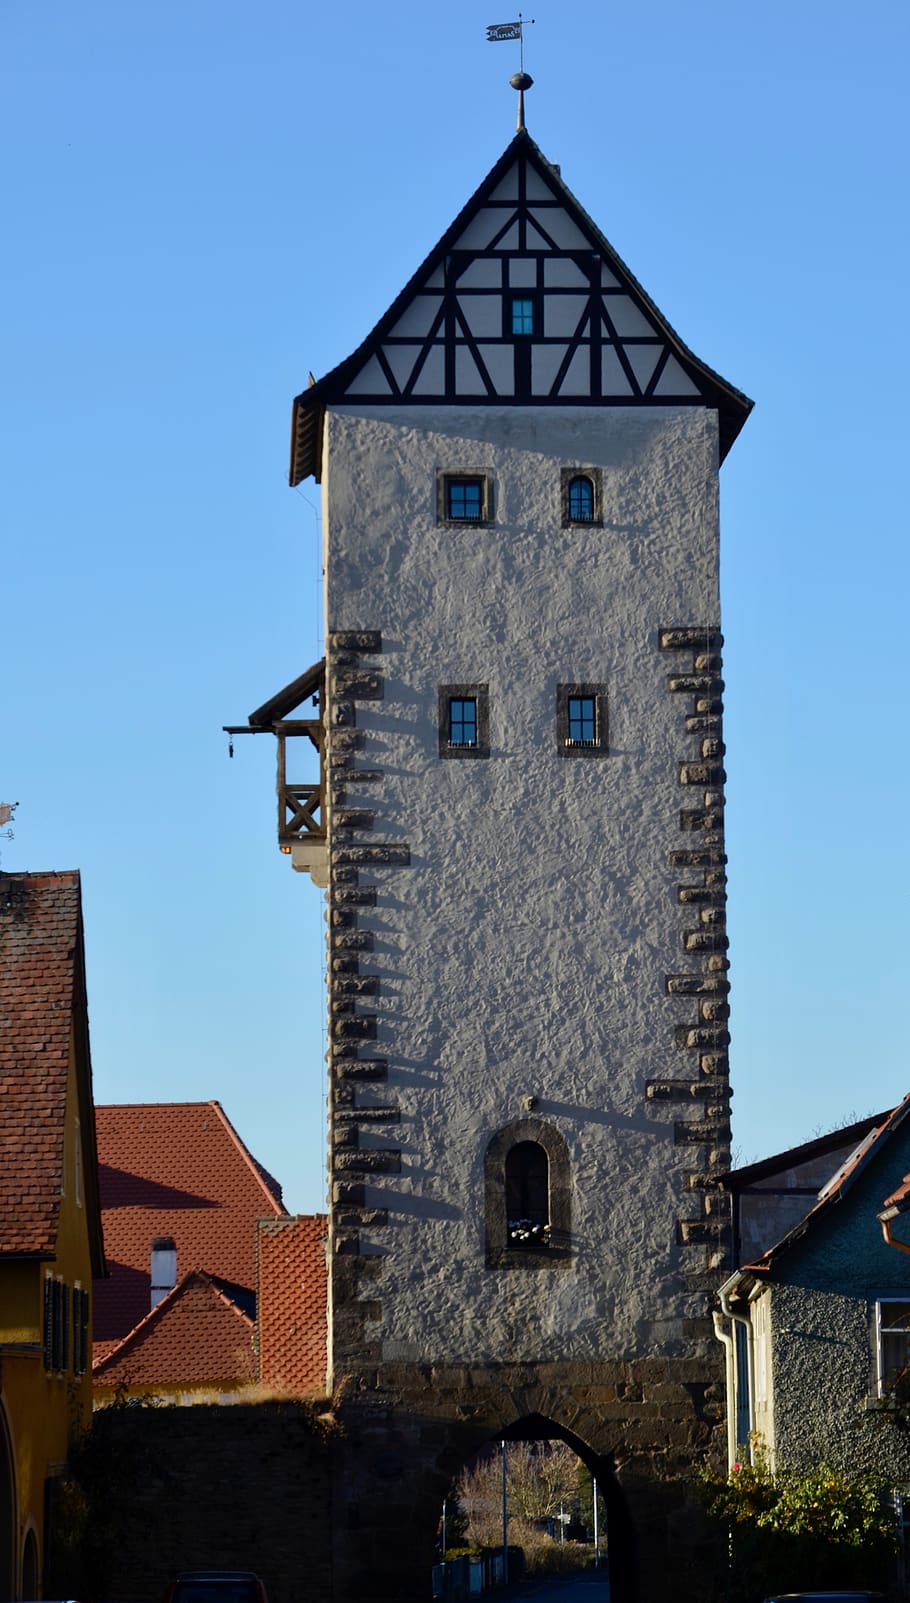 city gate, gate tower, historic center, historically, architecture, tower, places of interest, building, bavaria, swiss francs